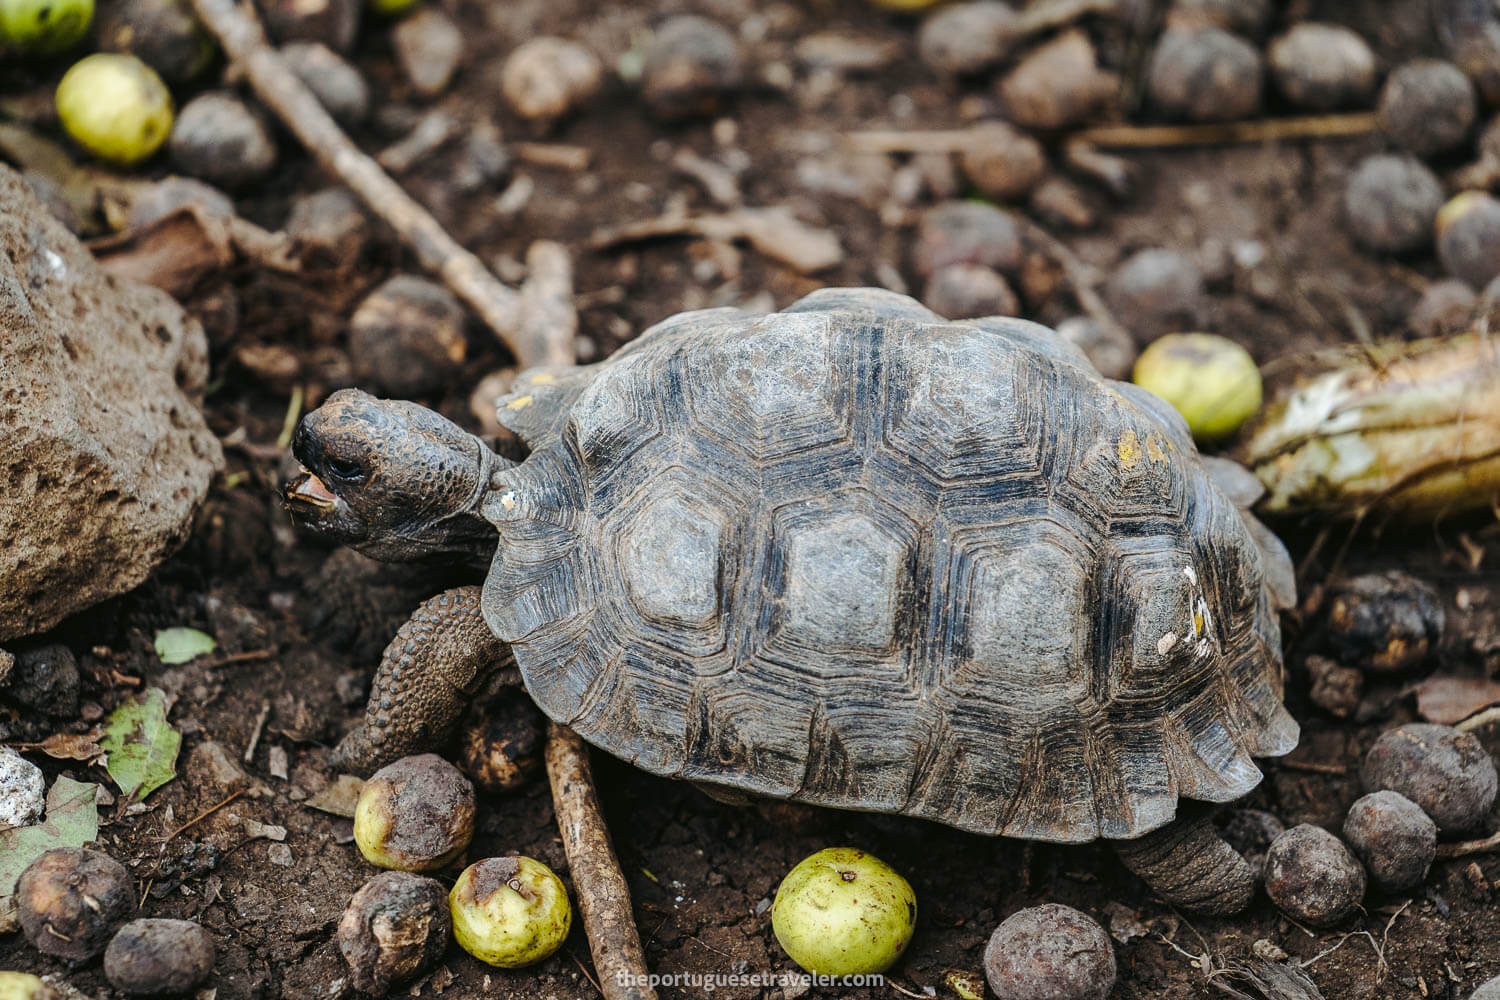 A baby Galapagos tortoise eating poisonous apples